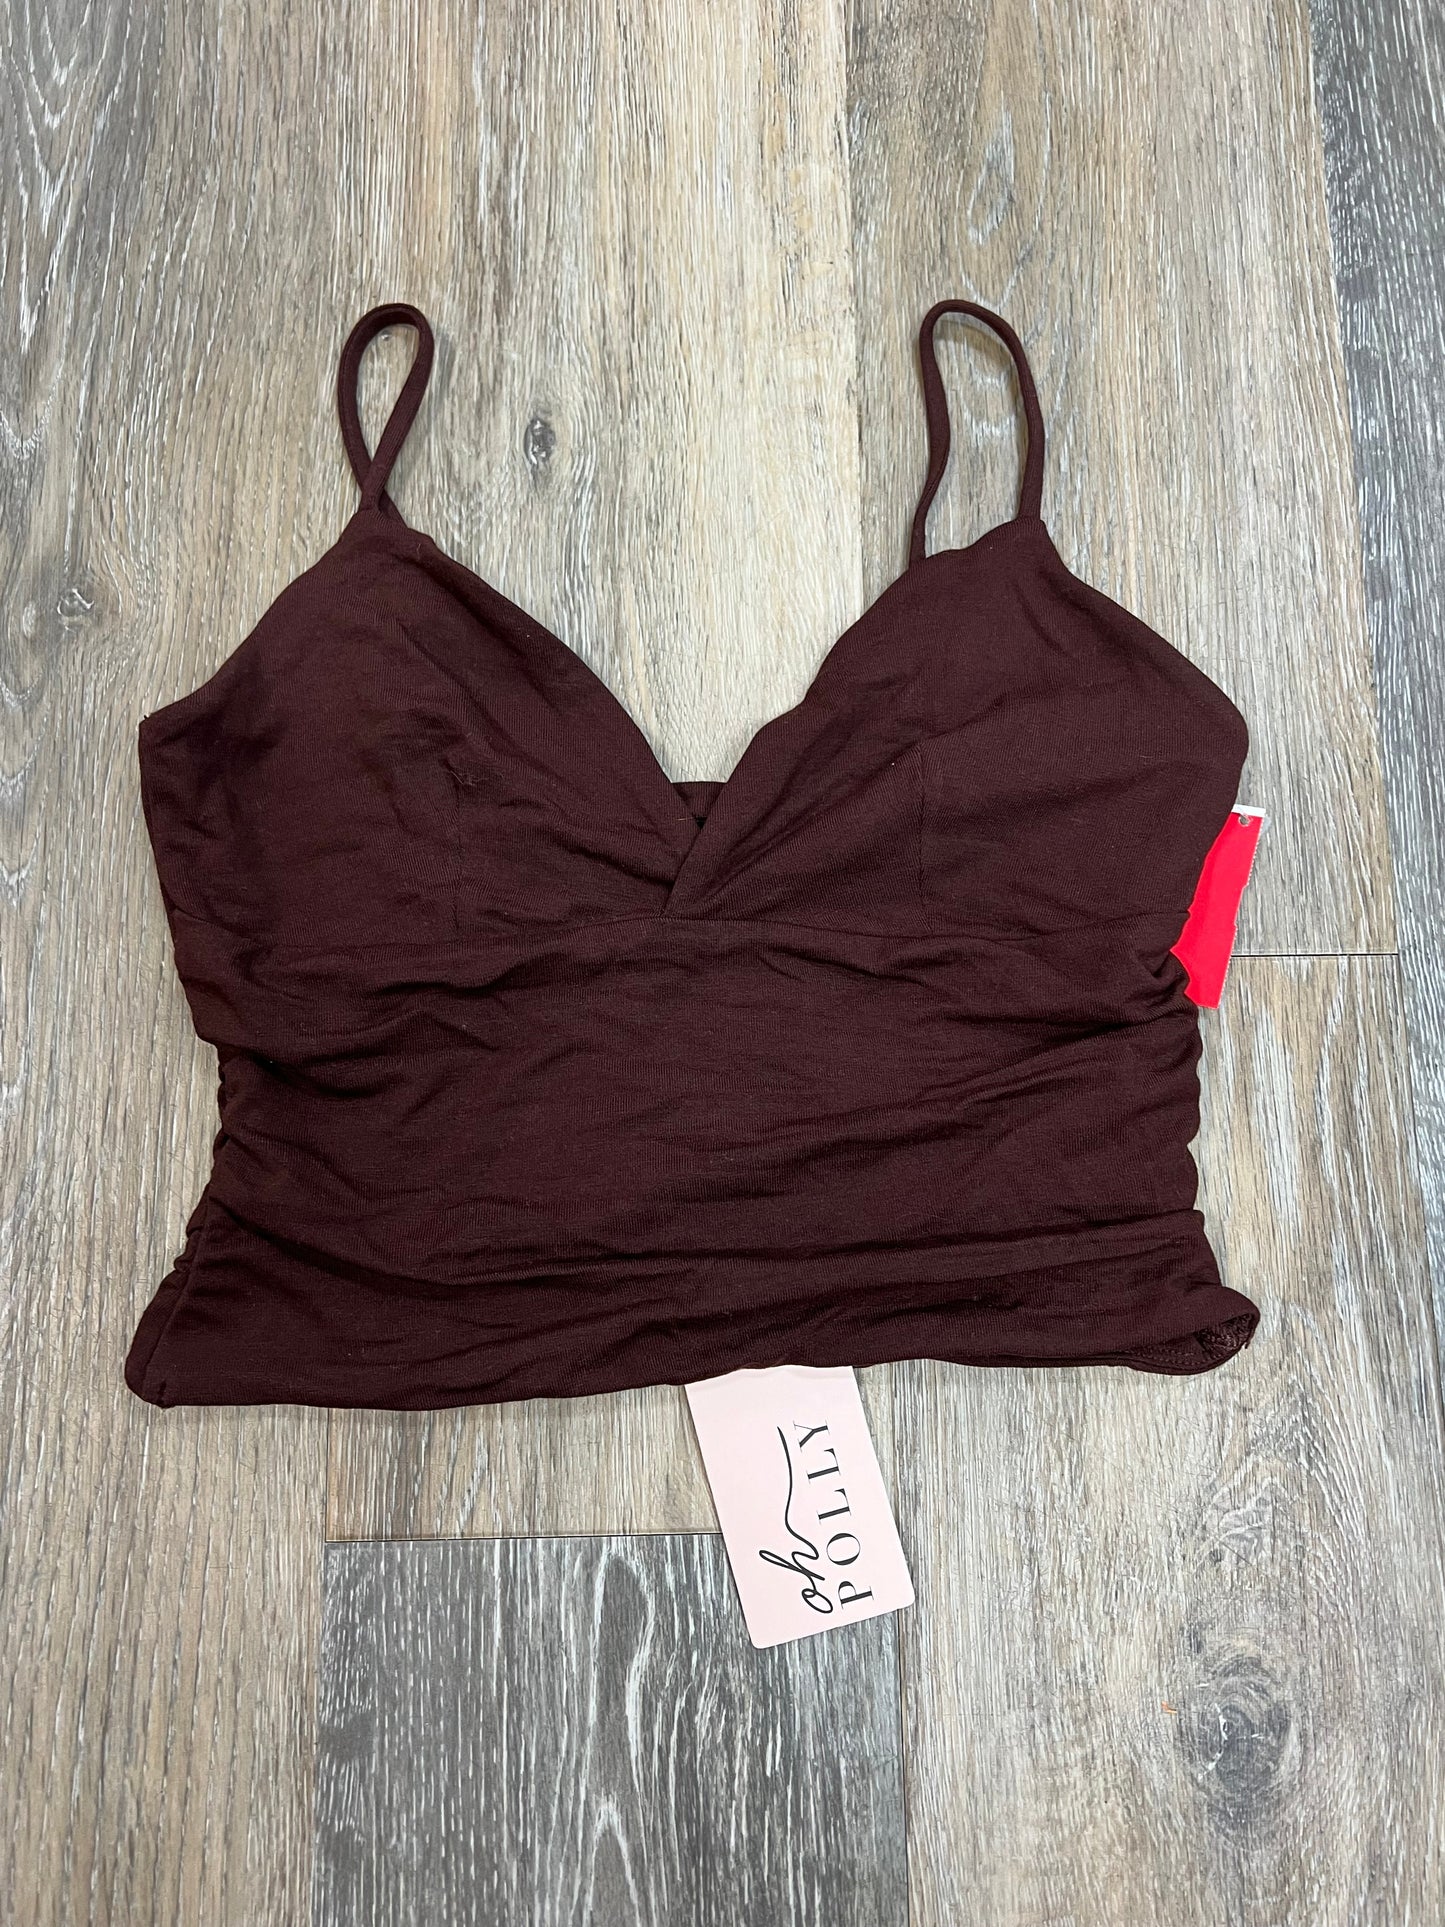 Brown Tank Top Oh Polly, Size S